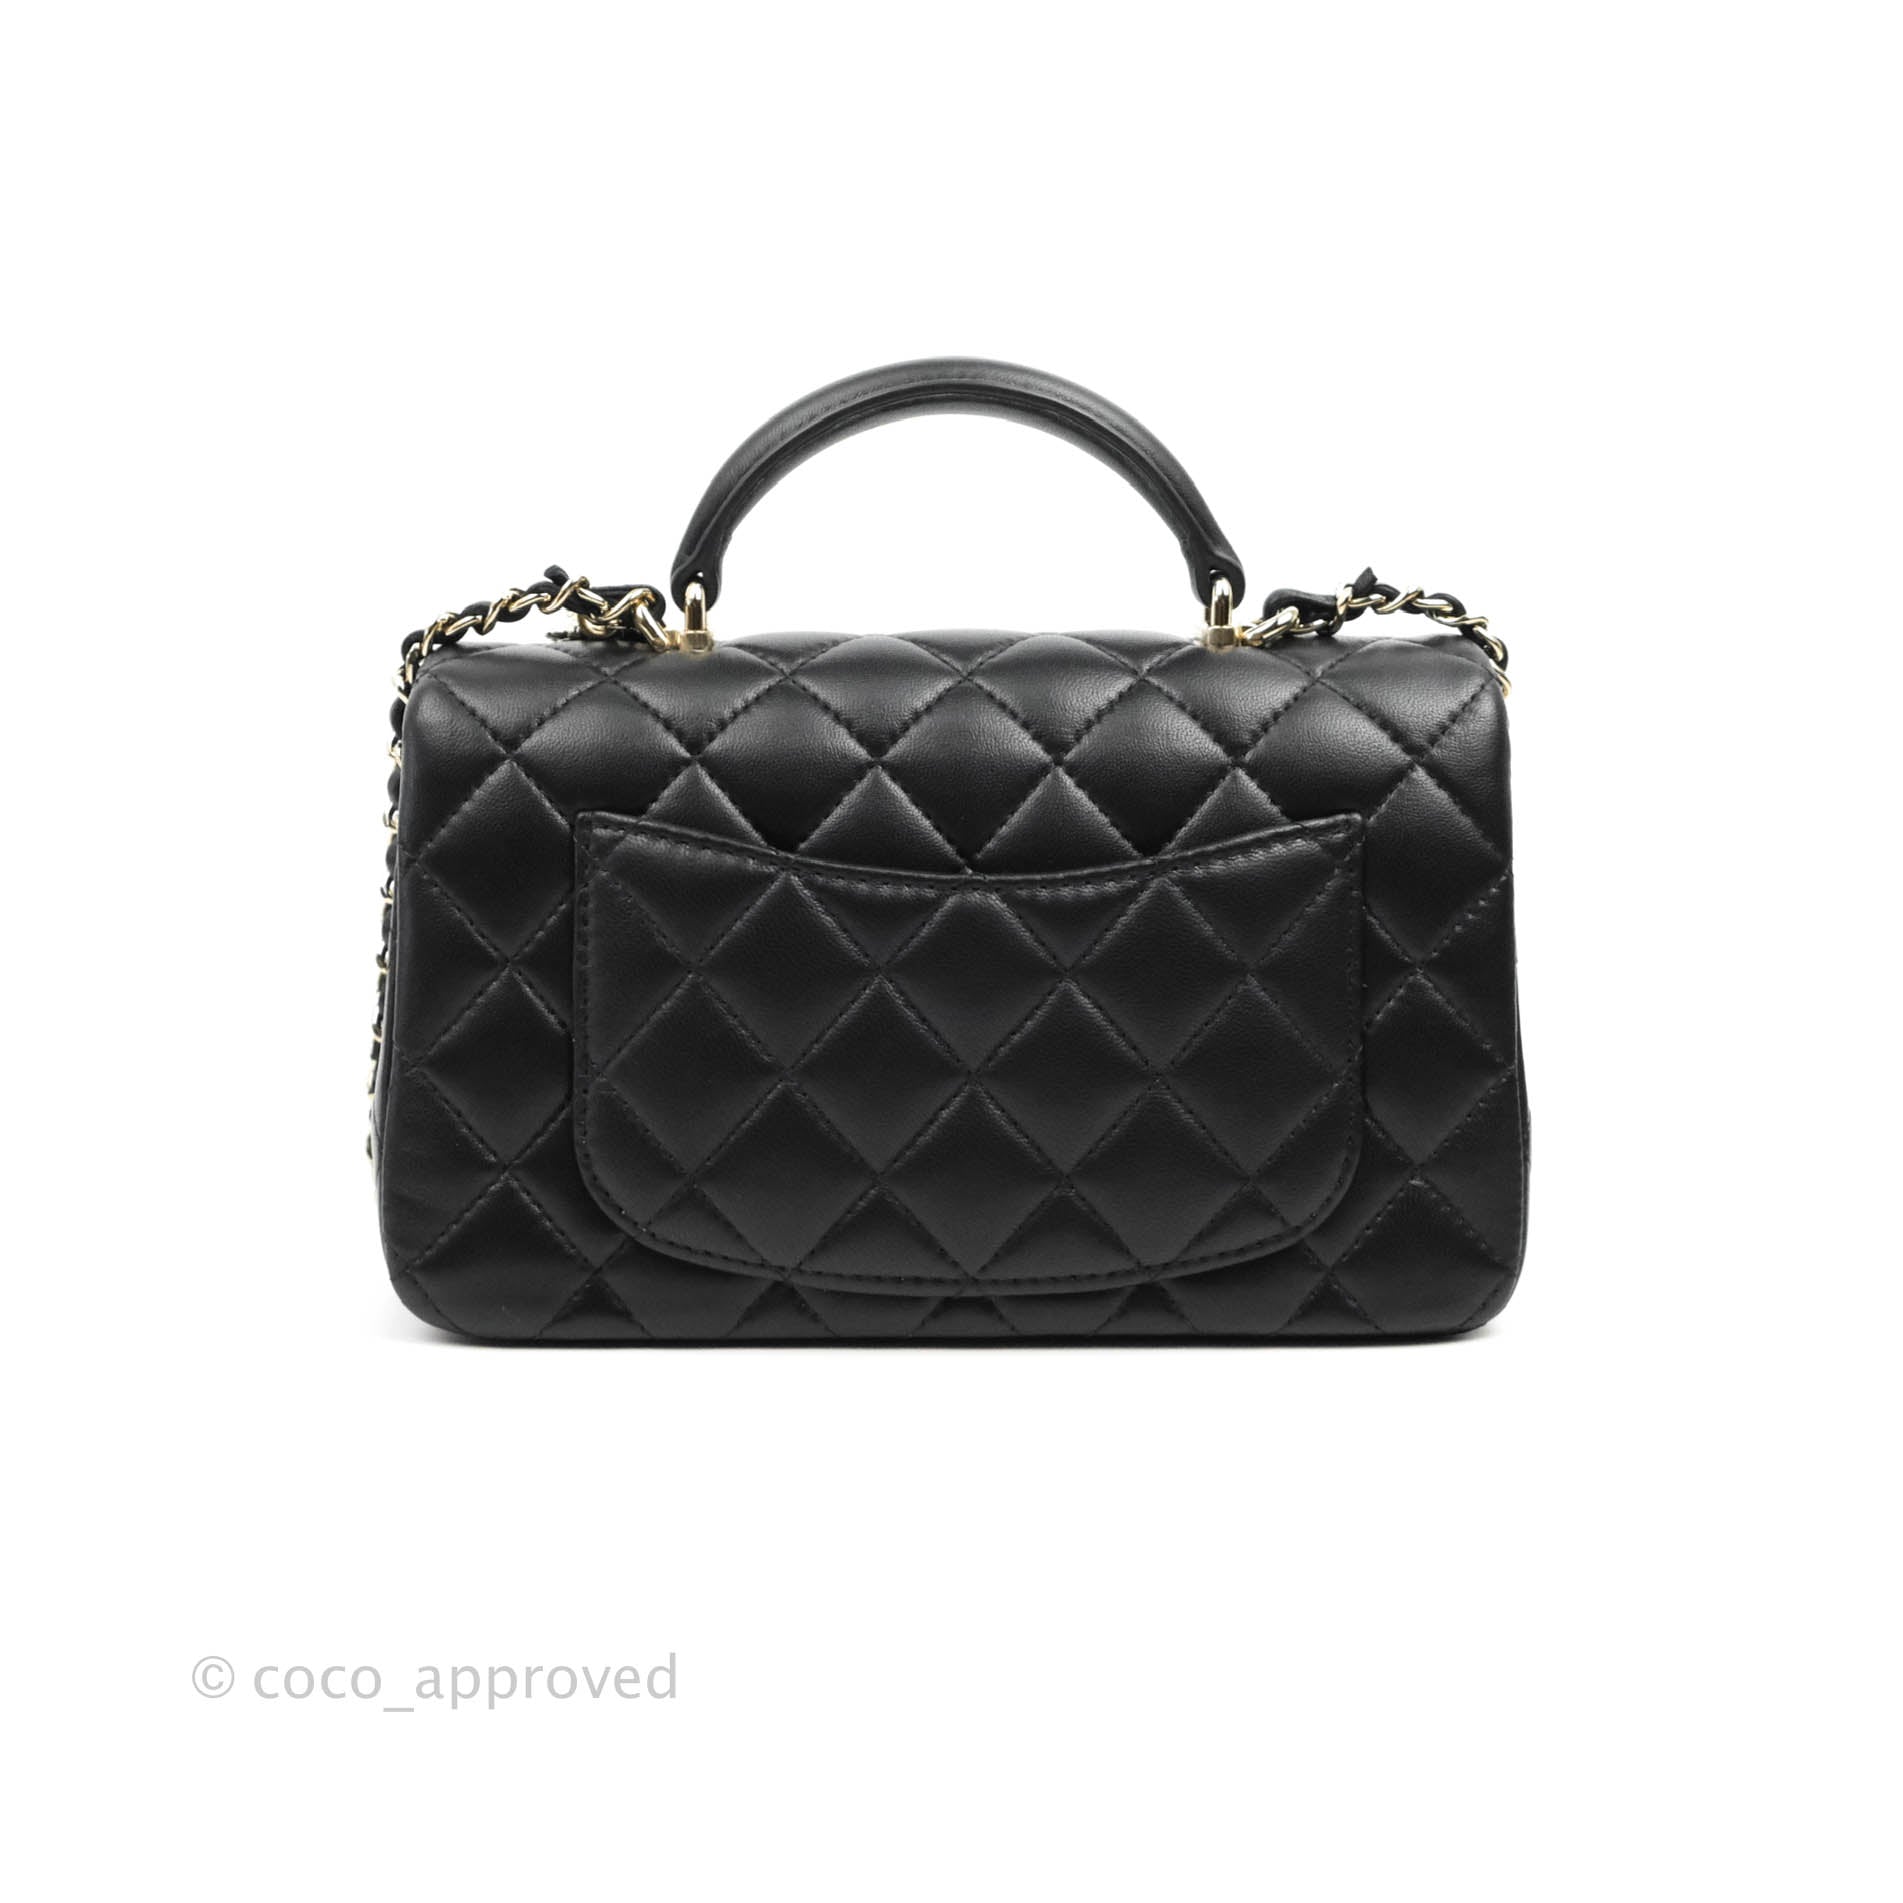 CHANEL Lambskin Quilted Small Trendy CC Dual Handle Flap Bag Grey